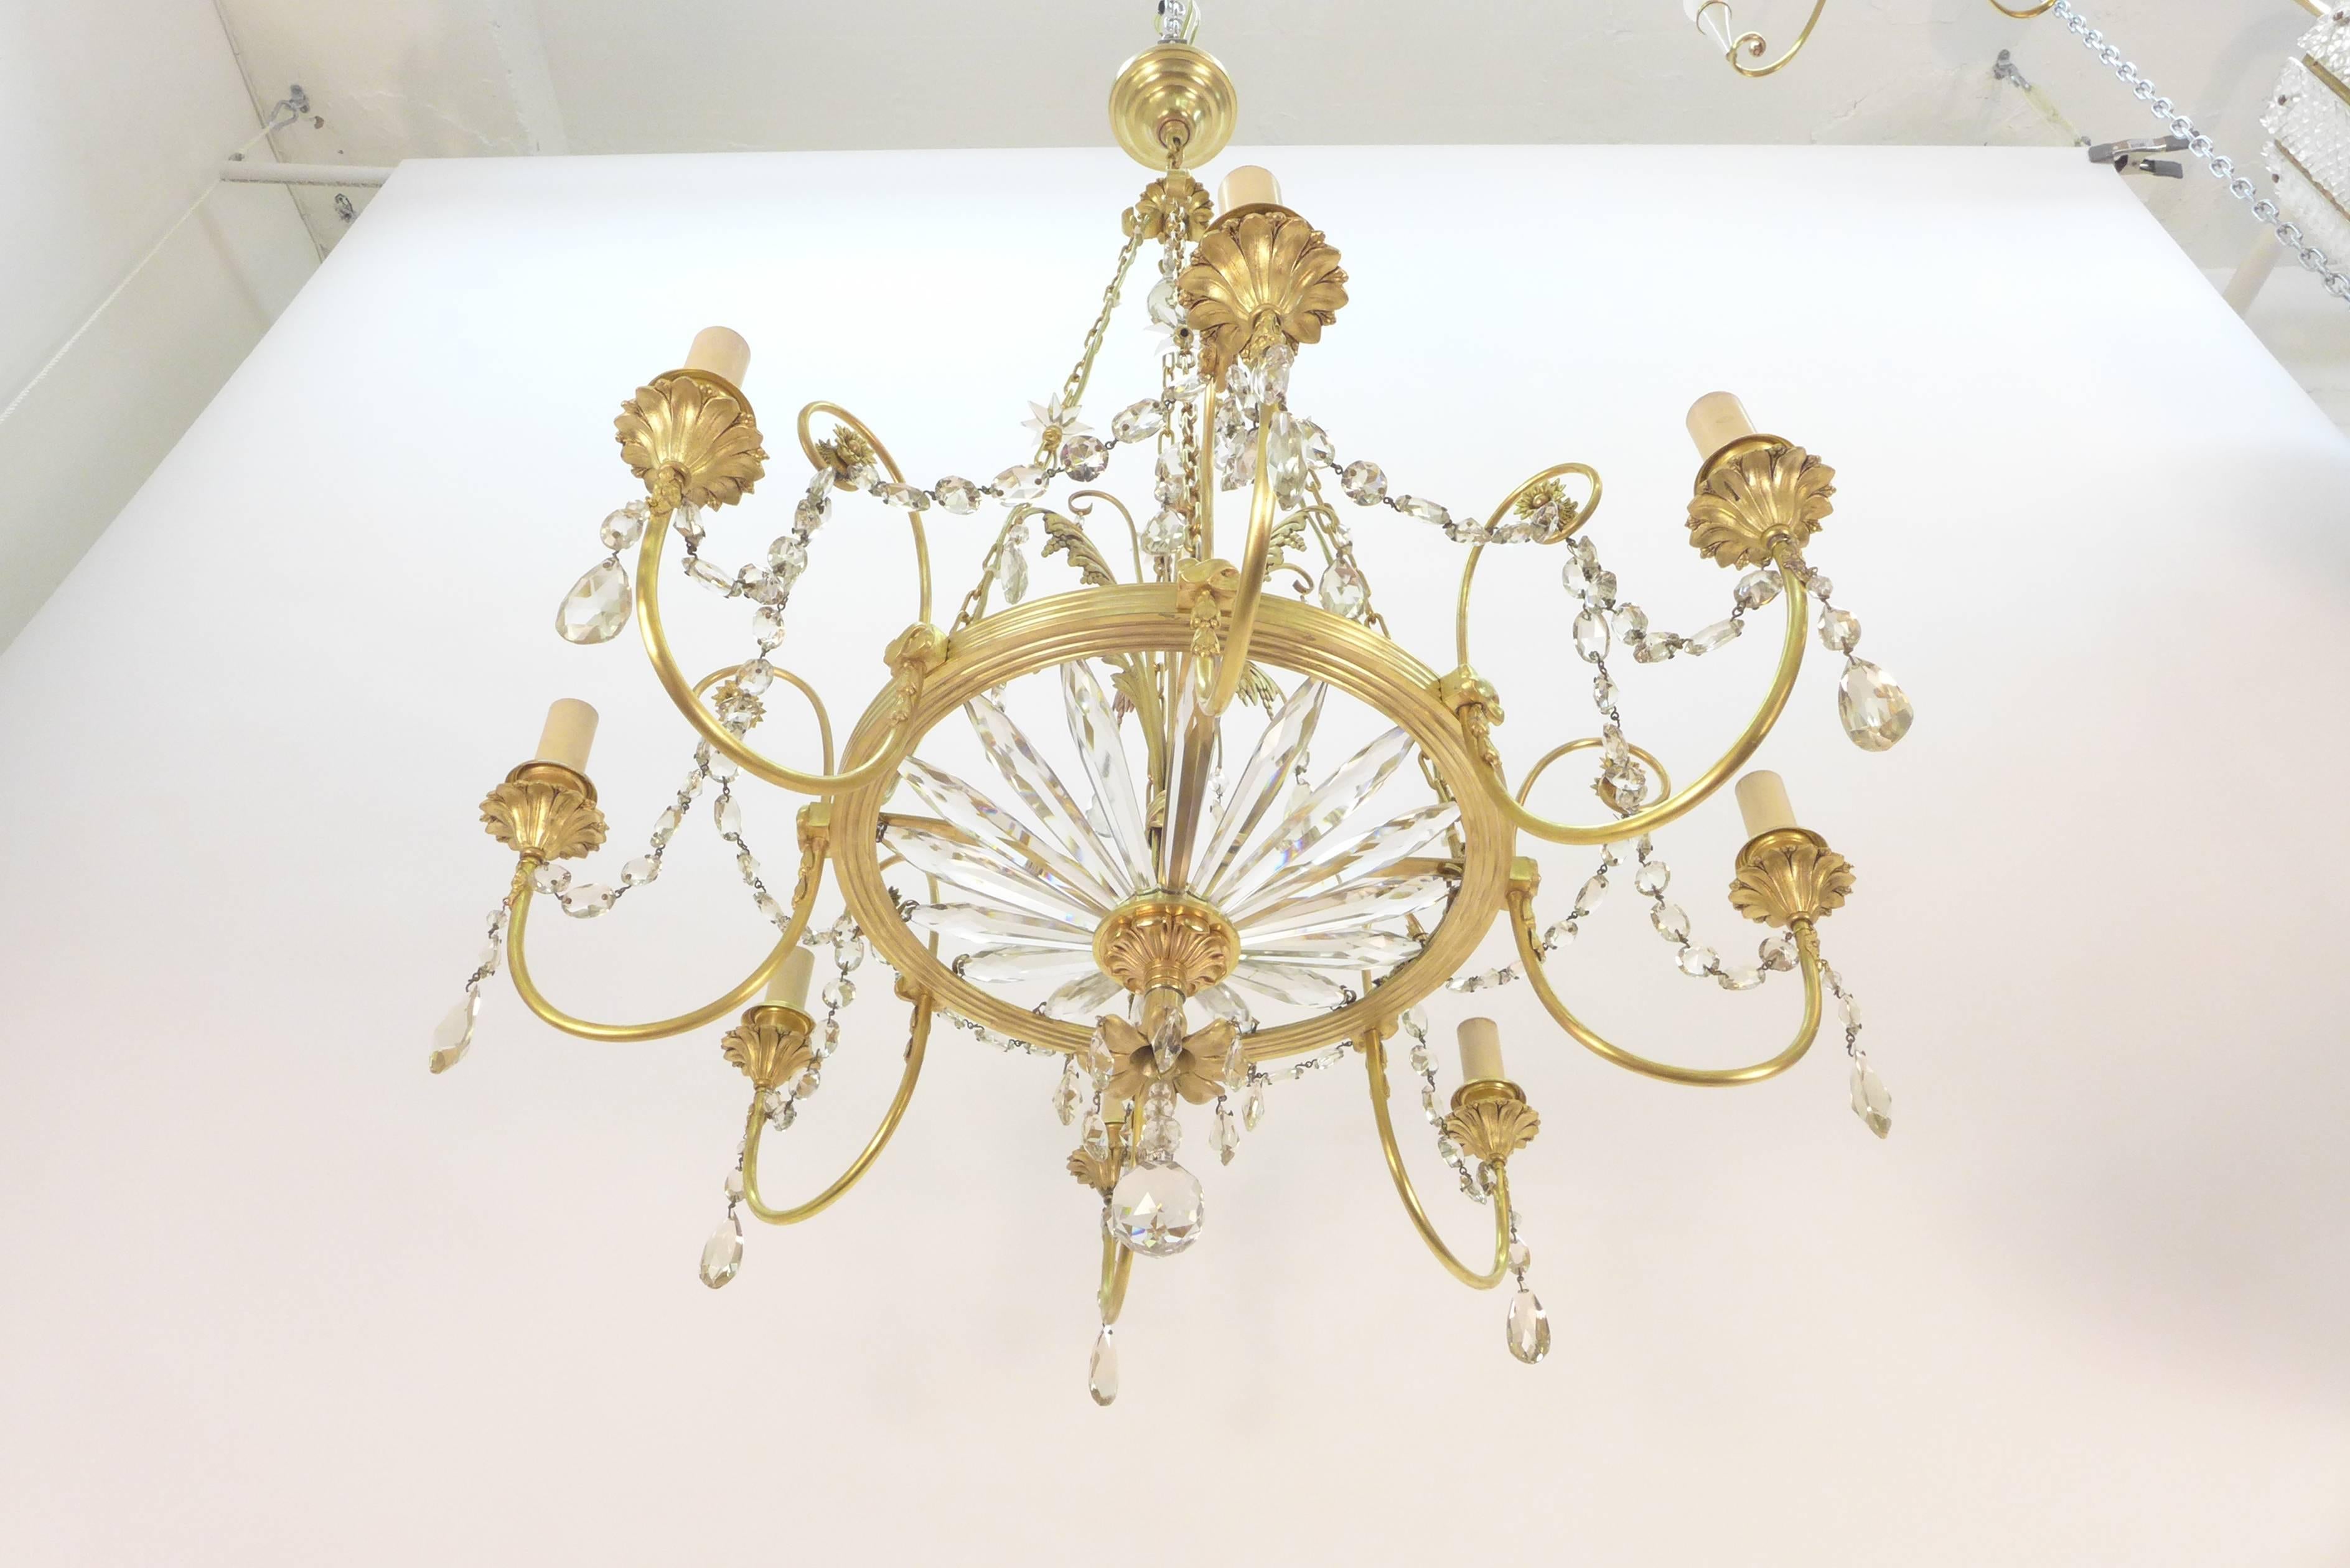 A French gilt bronze and glass eight-light chandelier late 19th century.
The linked hanging chains descending to a circlet issuing scroll branches with foliate-cast drip pans and sconces hung with faceted drops, a basket of faceted glass